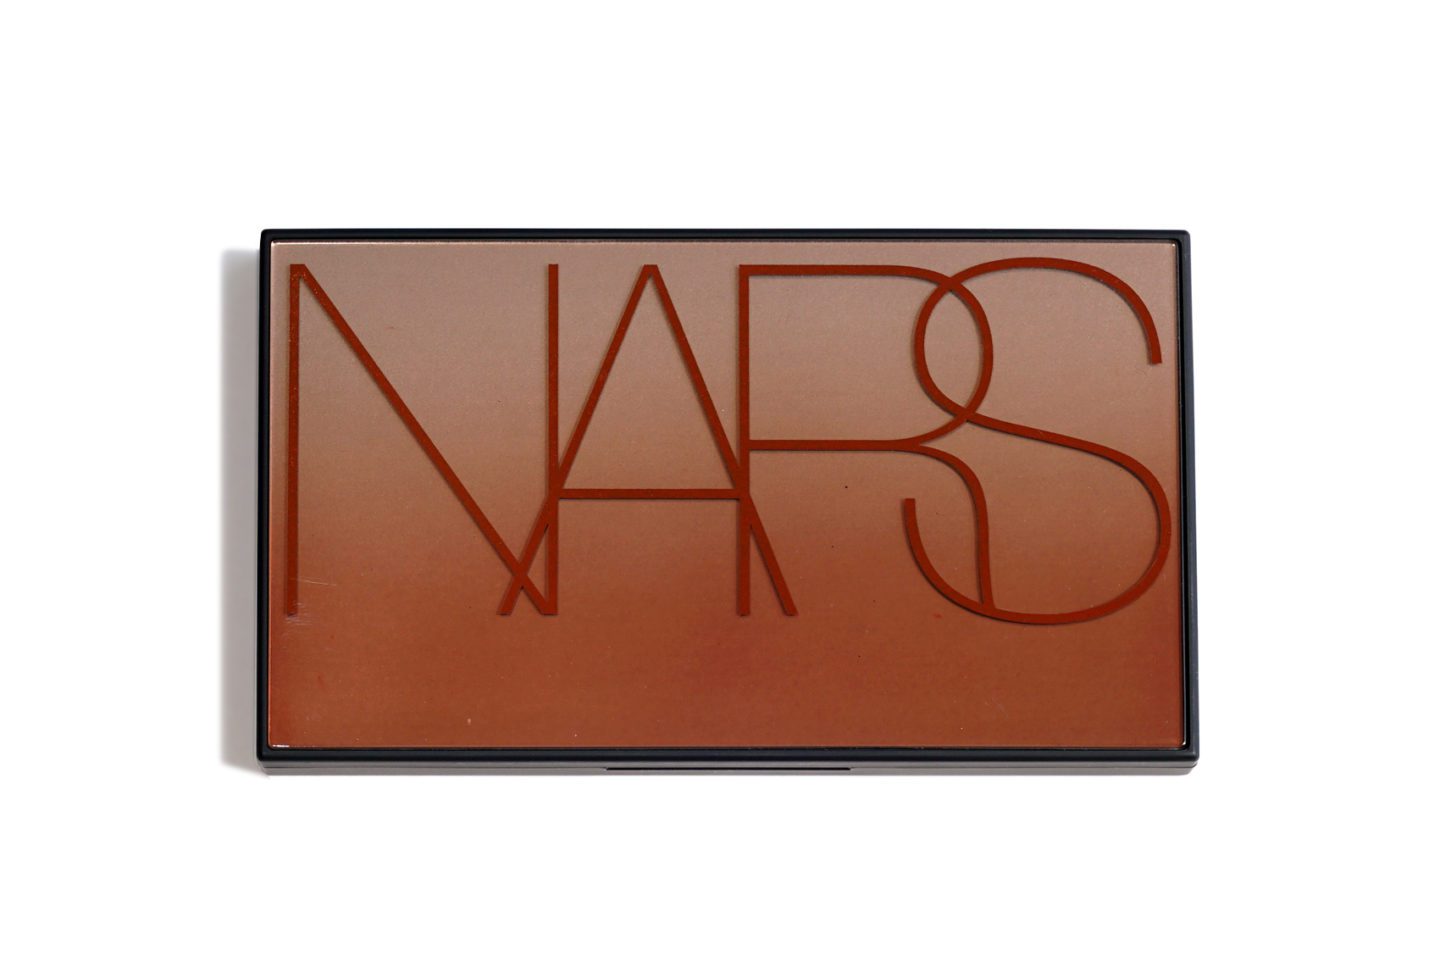 NARS Atomic Blonde Palette Review | The Beauty Look Book